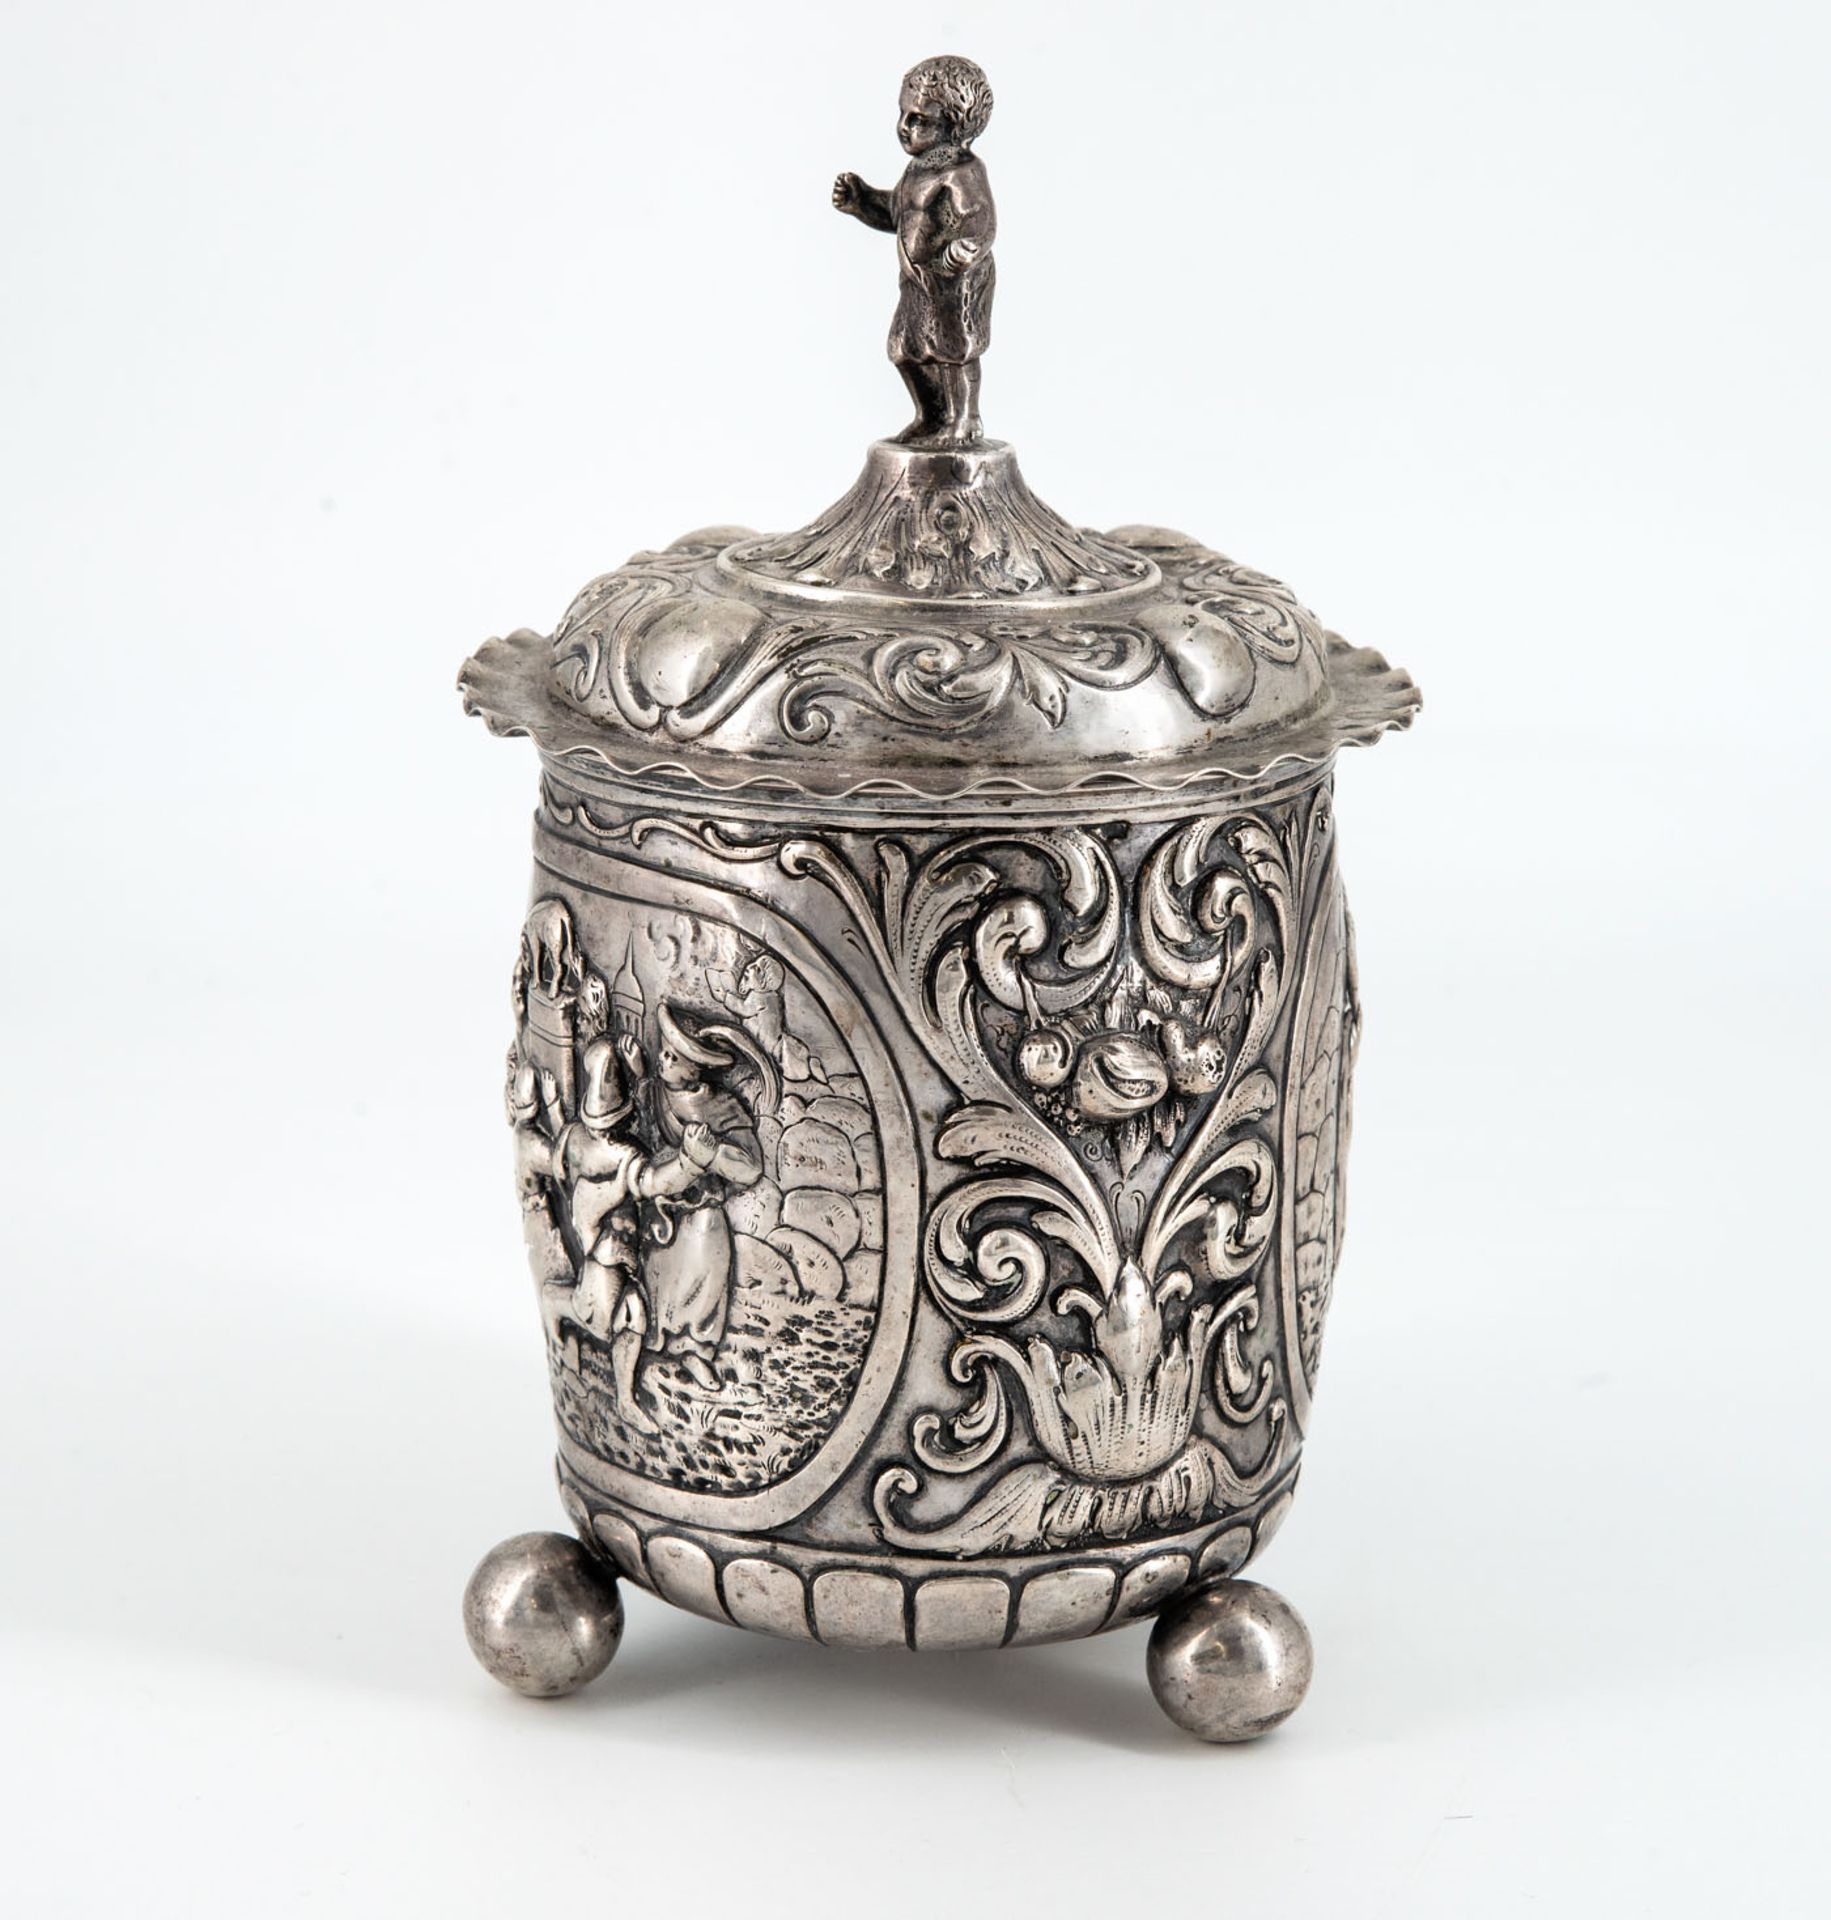 A Fine Silver Lidded Becher, Prob. Netherlands, 17/18th Century - Image 2 of 5